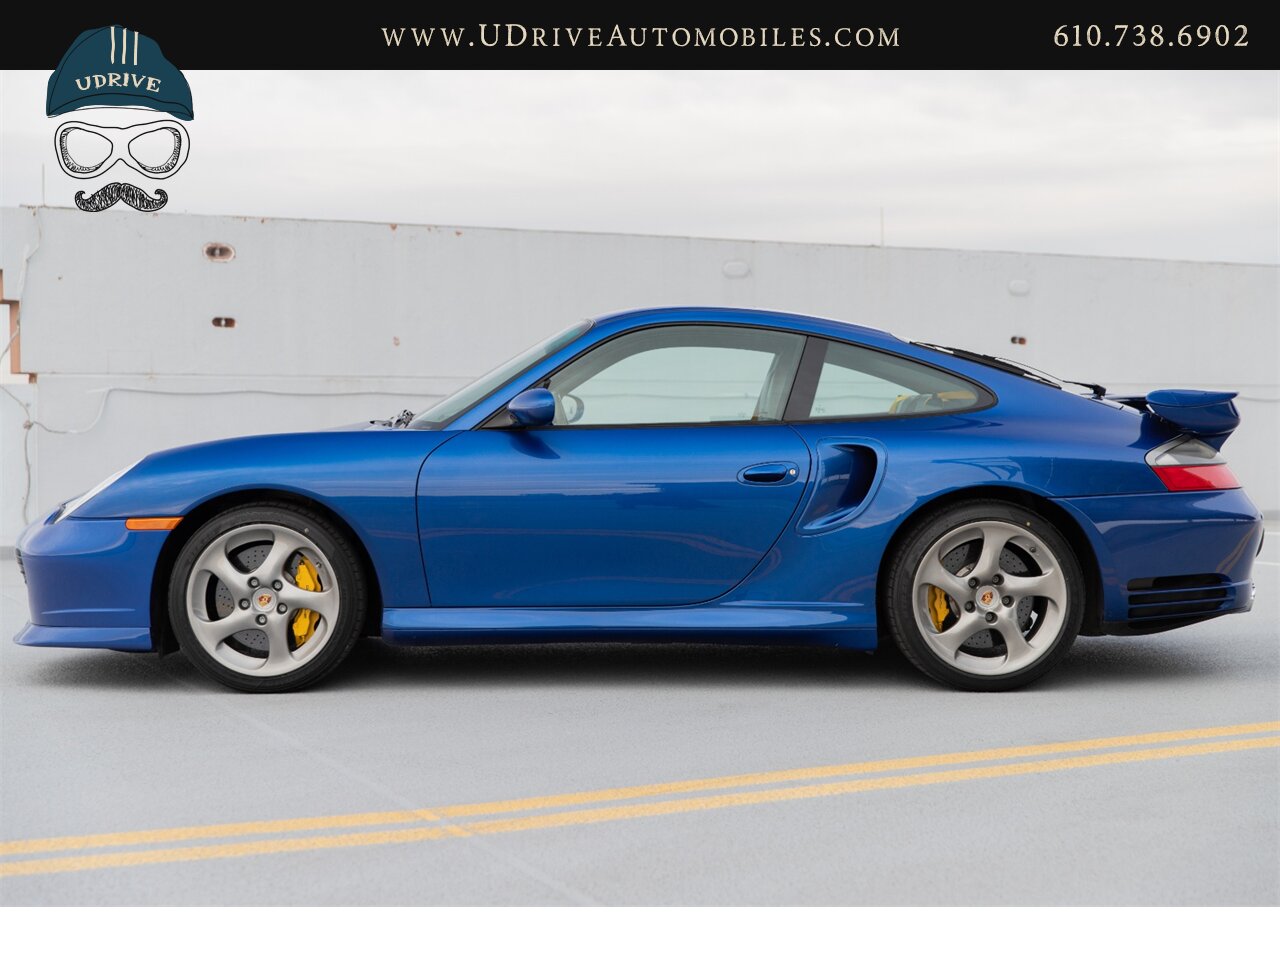 2005 Porsche 911 Turbo S Factory Aerokit Extremely Rare Cobalt Blue  Yellow Deviating Stitching 1 of a Kind Spec $160k MSRP - Photo 9 - West Chester, PA 19382